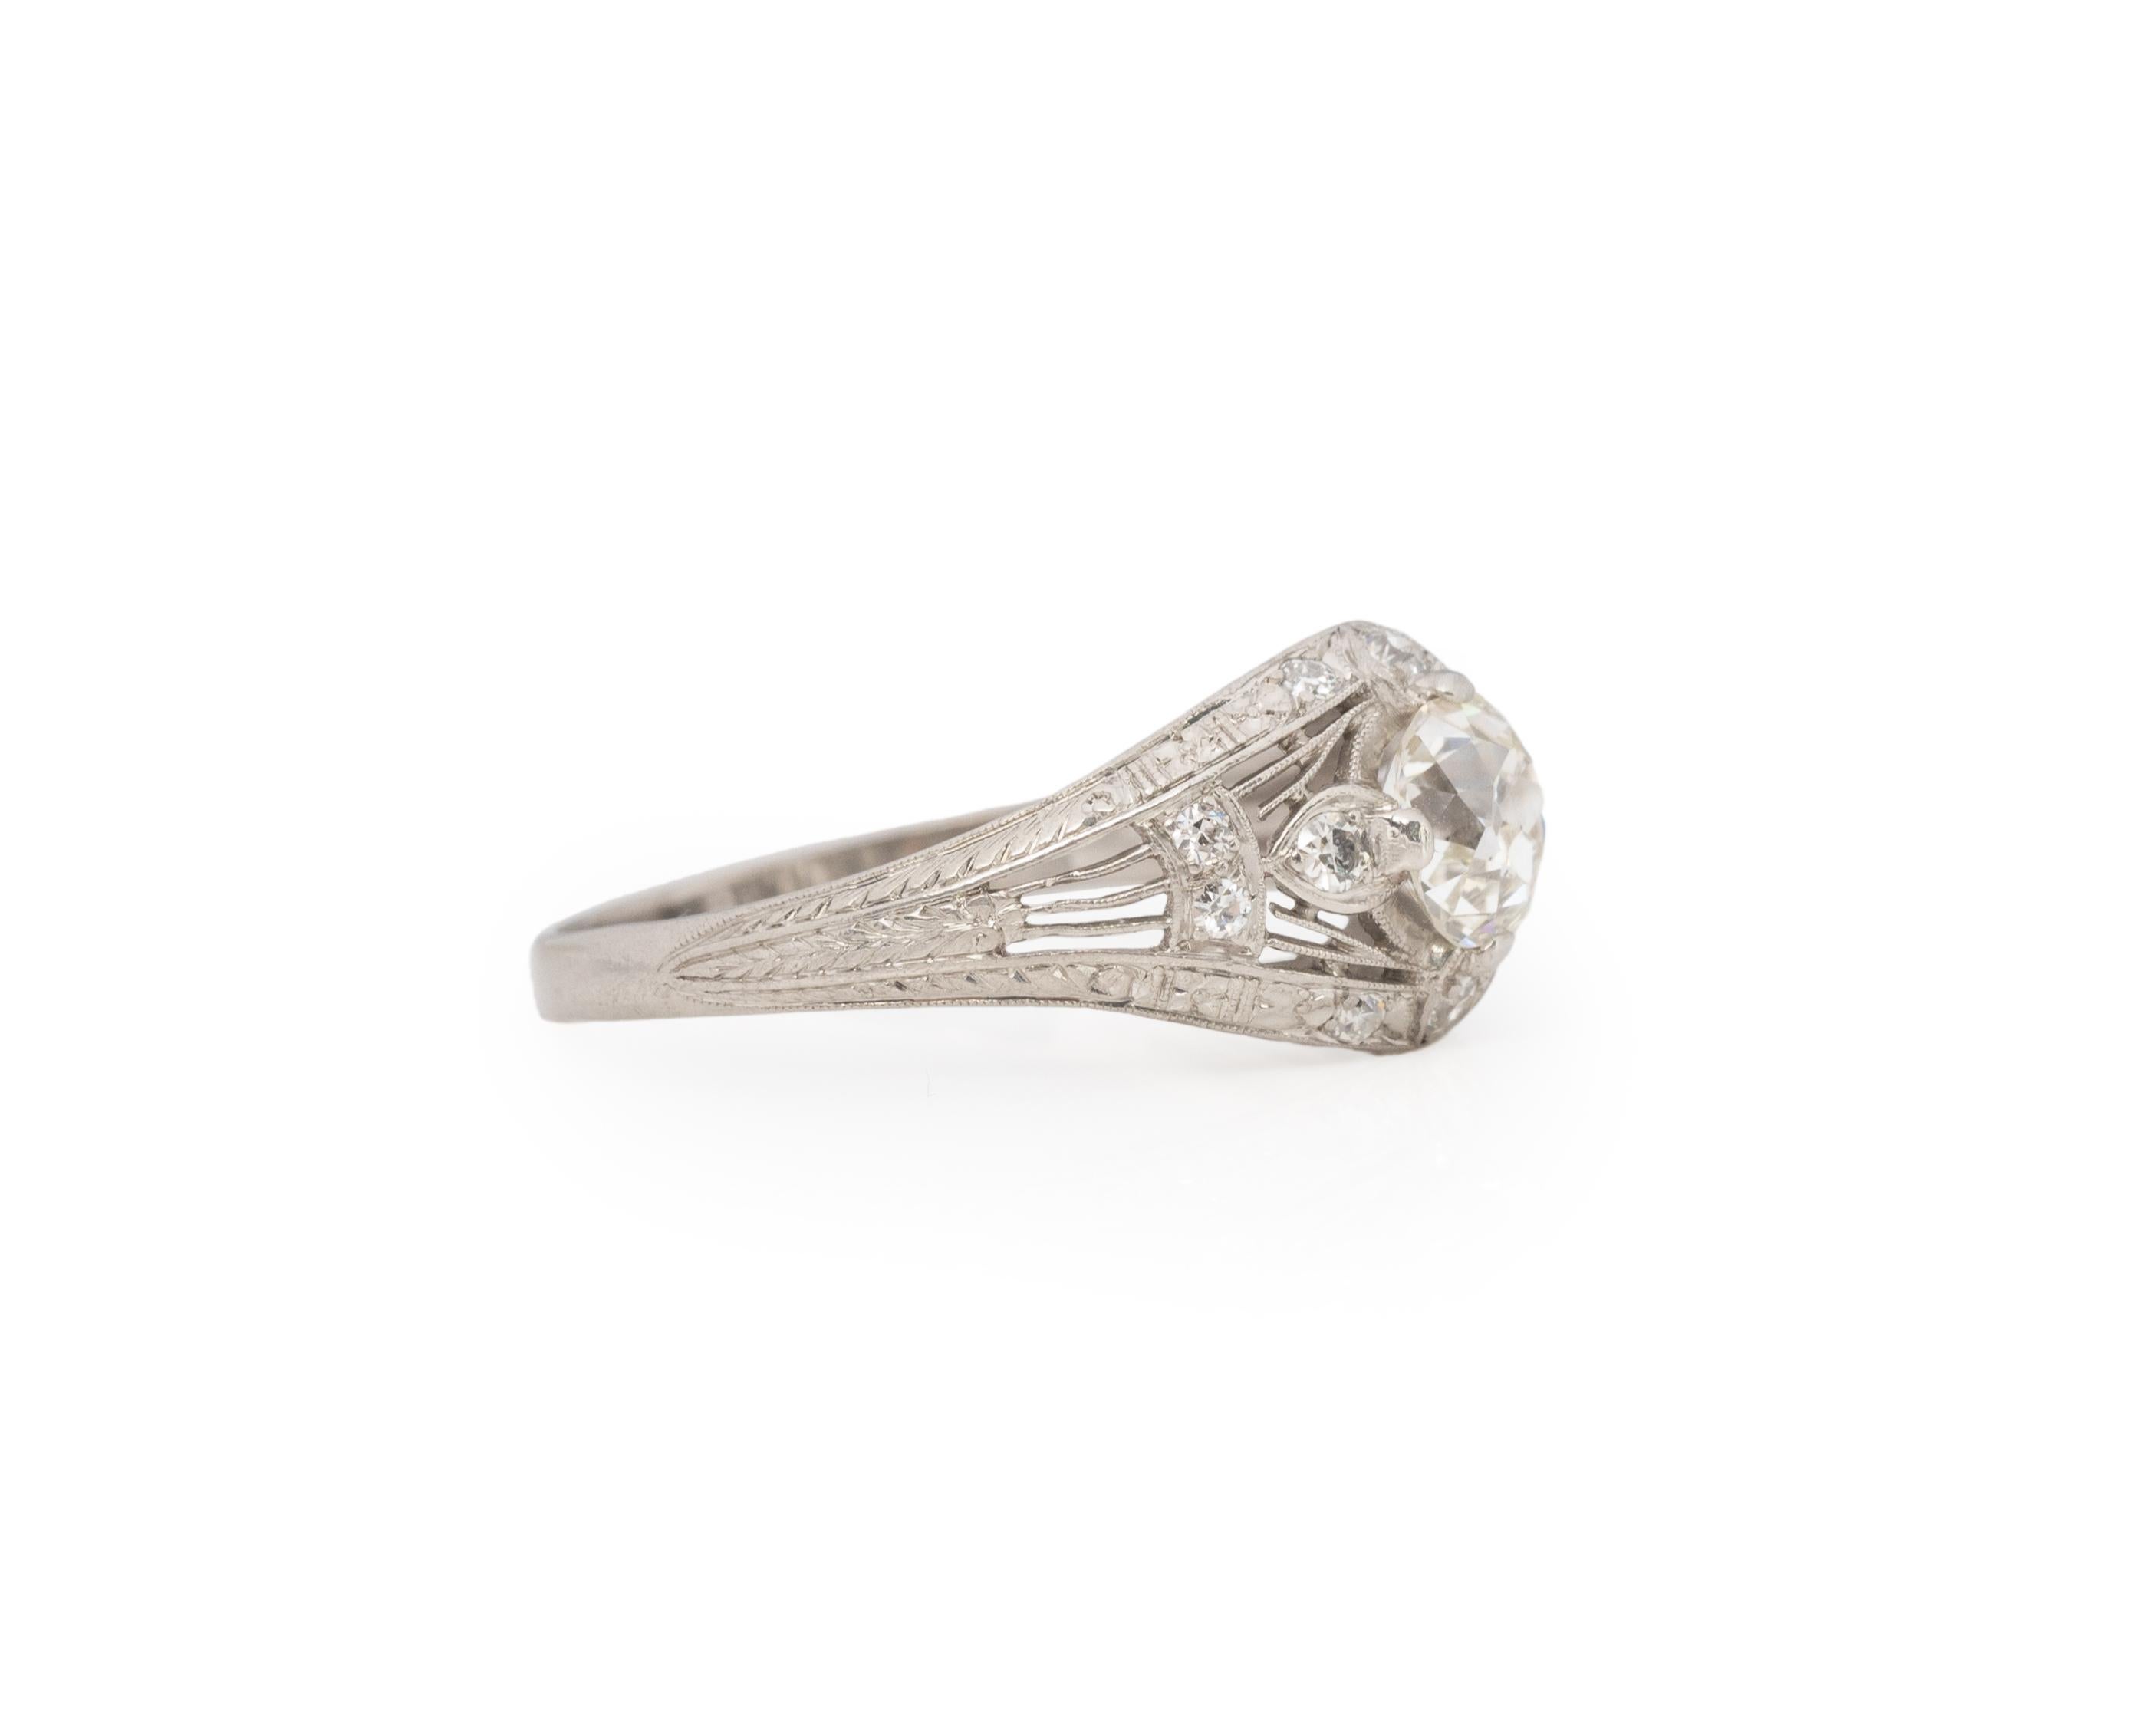 Item Details:
Ring Size: 8.25
Metal Type: Platinum [Hallmarked, and Tested]
Weight: 5.0 grams

Center Diamond Details:
GIA LAB REPORT #:6224792240
Weight: .96ct
Cut: Old Mine Brilliant (Antique Cushion)
Color: J
Clarity: VS1
Measurements: 5.94mm x